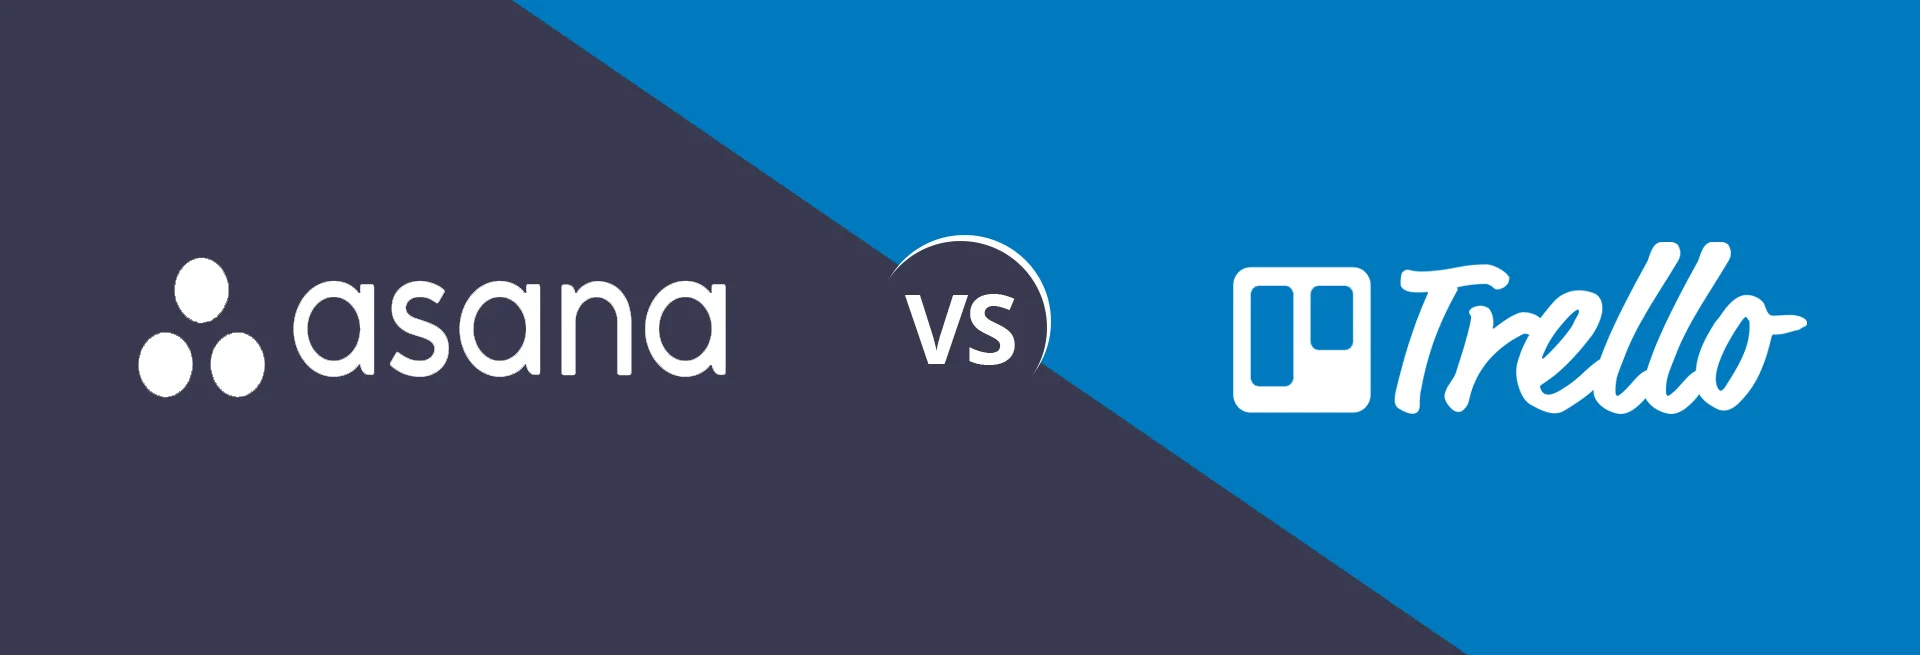 Asana vs Trello: Best Project Management Tools for Remote Working